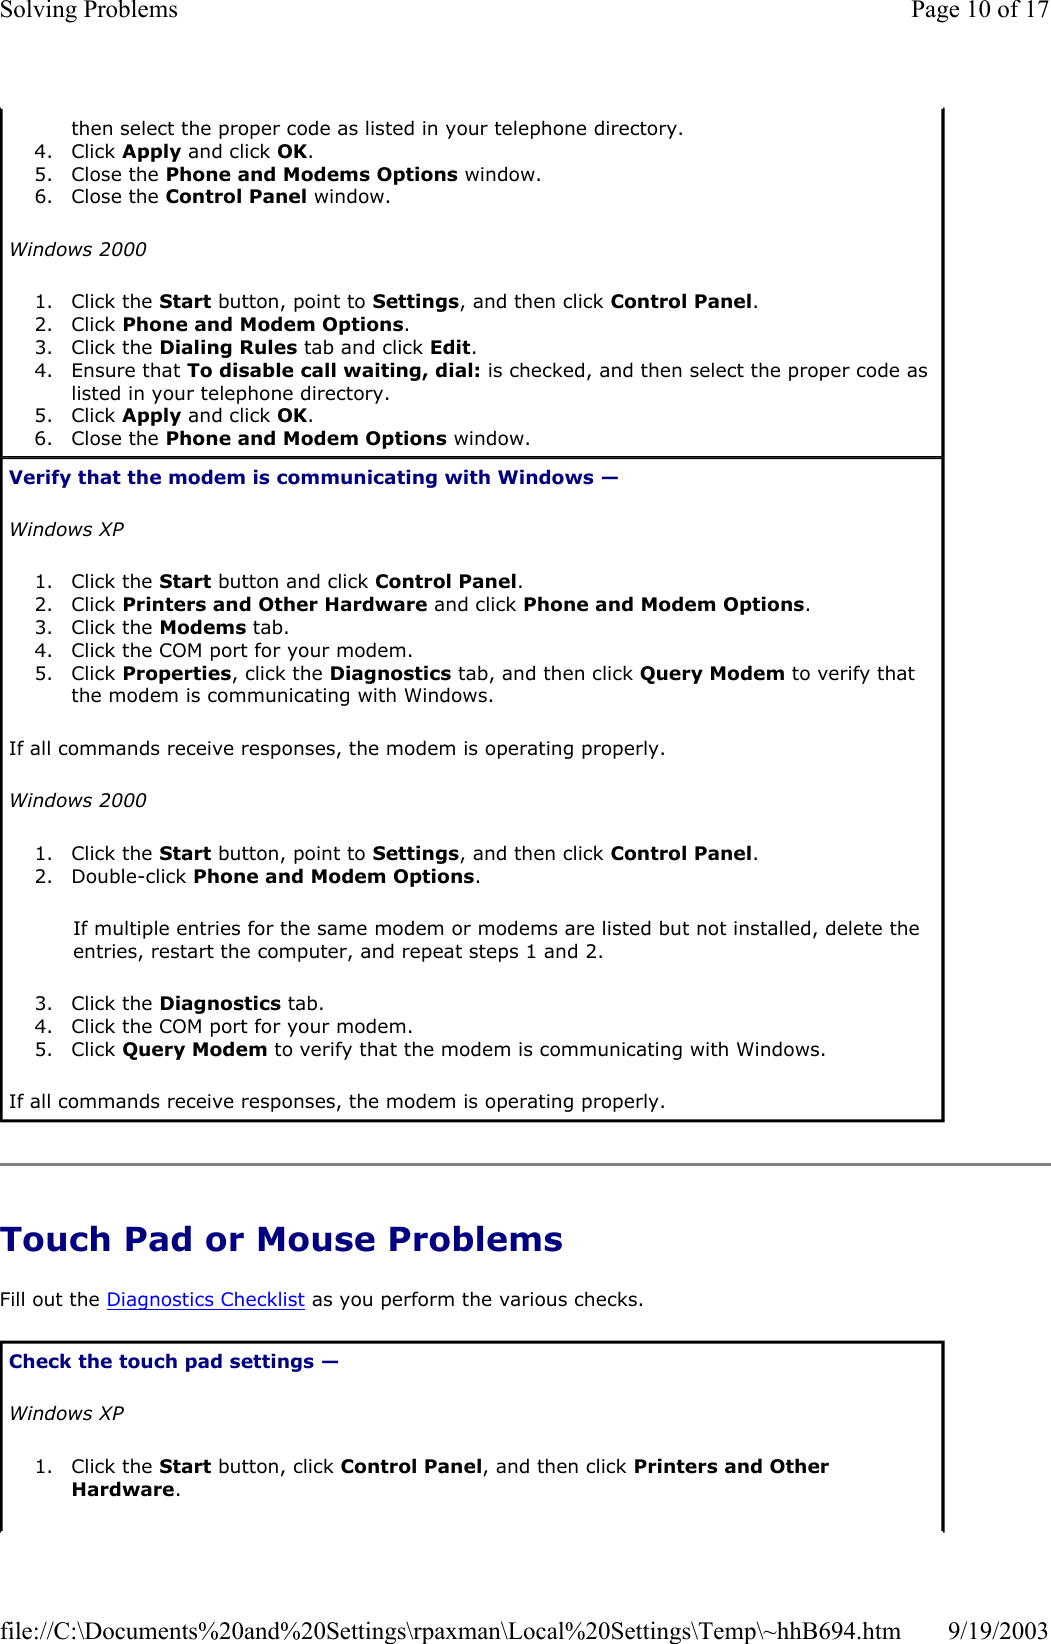 Touch Pad or Mouse Problems Fill out the Diagnostics Checklist as you perform the various checks. then select the proper code as listed in your telephone directory.  4. Click Apply and click OK.  5. Close the Phone and Modems Options window.  6. Close the Control Panel window.  Windows 2000 1. Click the Start button, point to Settings, and then click Control Panel.  2. Click Phone and Modem Options.  3. Click the Dialing Rules tab and click Edit.  4. Ensure that To disable call waiting, dial: is checked, and then select the proper code as listed in your telephone directory.  5. Click Apply and click OK.  6. Close the Phone and Modem Options window.  Verify that the modem is communicating with Windows —  Windows XP 1. Click the Start button and click Control Panel.  2. Click Printers and Other Hardware and click Phone and Modem Options.  3. Click the Modems tab.  4. Click the COM port for your modem.  5. Click Properties, click the Diagnostics tab, and then click Query Modem to verify that the modem is communicating with Windows.  If all commands receive responses, the modem is operating properly. Windows 2000 1. Click the Start button, point to Settings, and then click Control Panel.  2. Double-click Phone and Modem Options.  If multiple entries for the same modem or modems are listed but not installed, delete the entries, restart the computer, and repeat steps 1 and 2. 3. Click the Diagnostics tab.  4. Click the COM port for your modem.  5. Click Query Modem to verify that the modem is communicating with Windows.  If all commands receive responses, the modem is operating properly. Check the touch pad settings —  Windows XP 1. Click the Start button, click Control Panel, and then click Printers and Other Hardware.  Page 10 of 17Solving Problems9/19/2003file://C:\Documents%20and%20Settings\rpaxman\Local%20Settings\Temp\~hhB694.htm